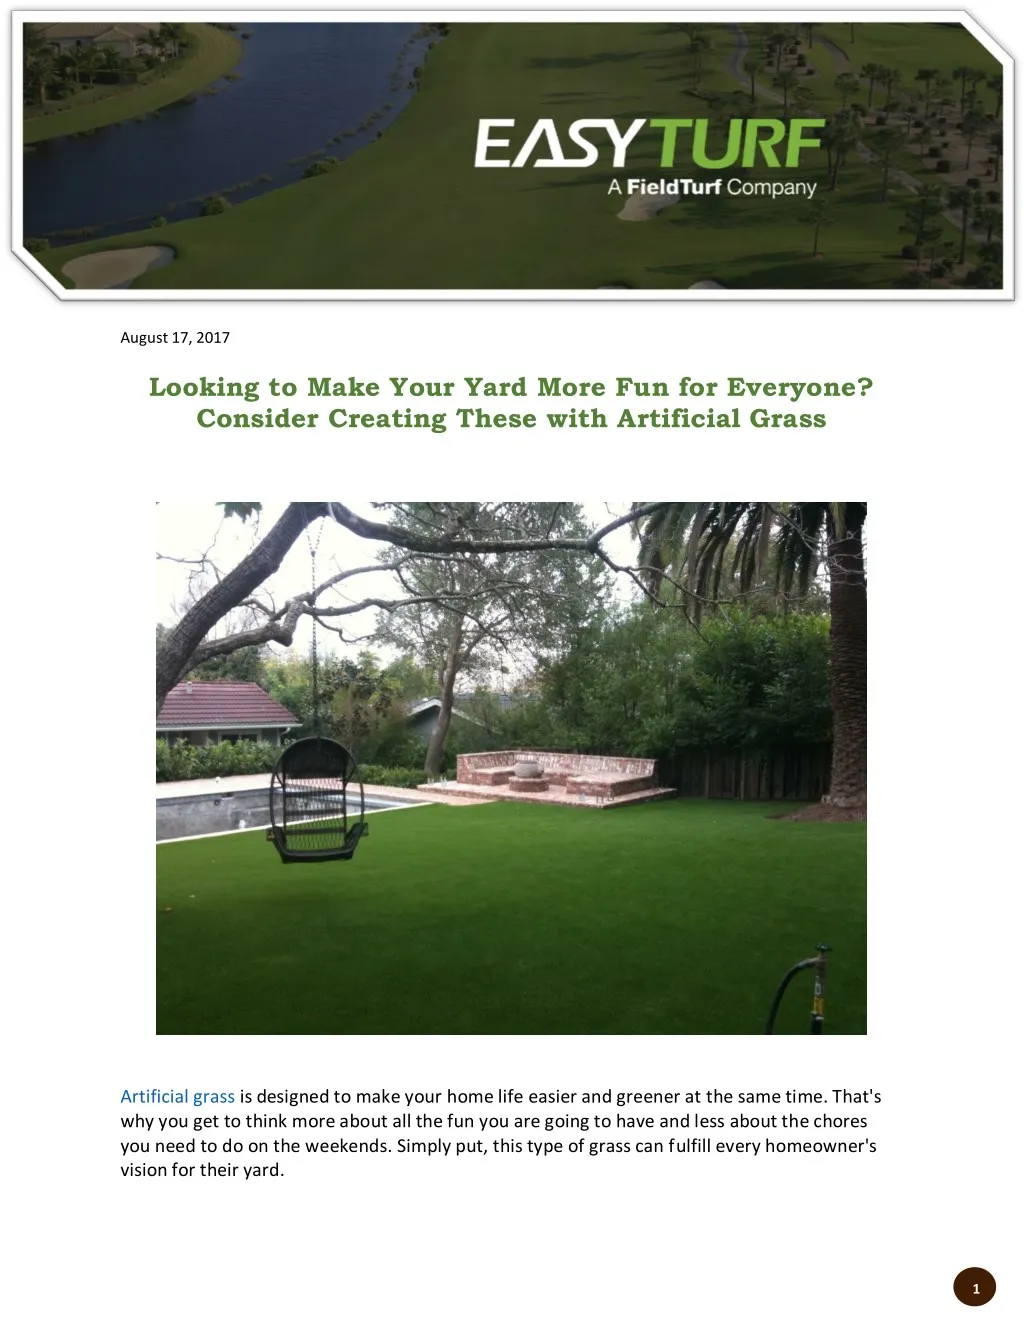 august 17 2017 looking to make your yard more